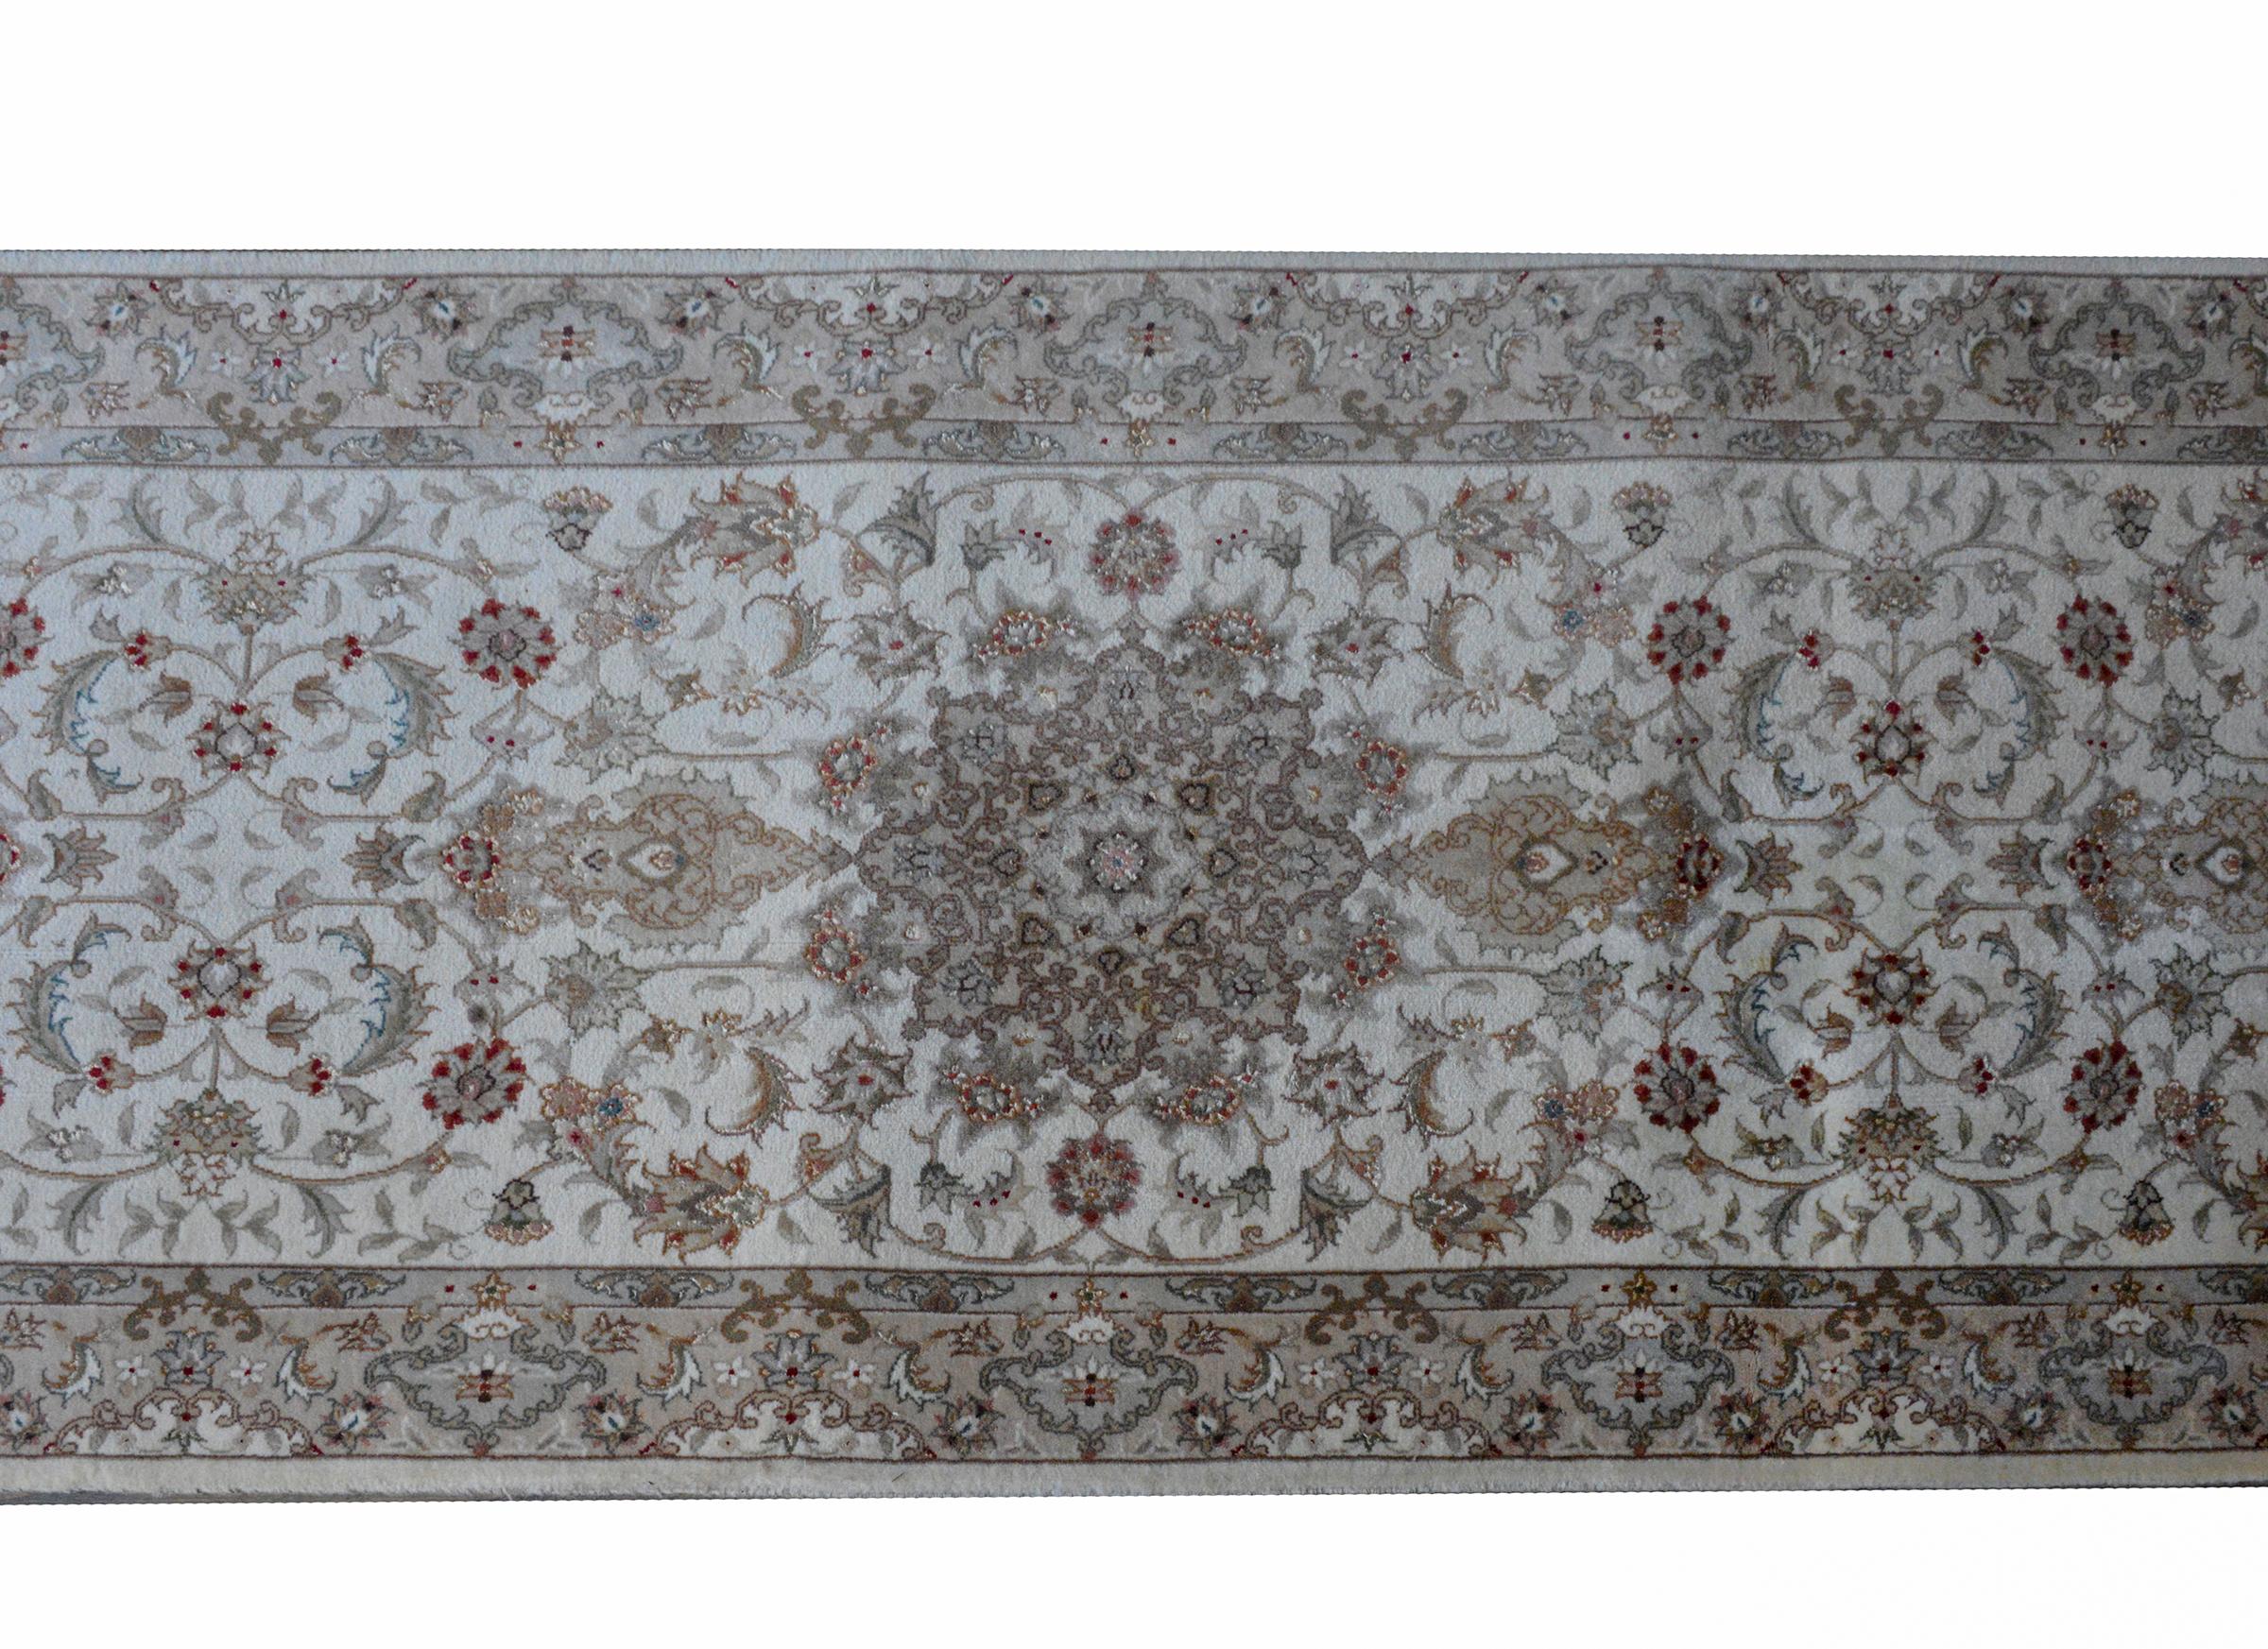 A beautiful vintage Pakistani runner woven with a Tabriz pattern containing several large medallions woven with scrolling vines and flowers woven in muted colors including brick red, rose, gray, steel blue, and gold, against a silver background, and